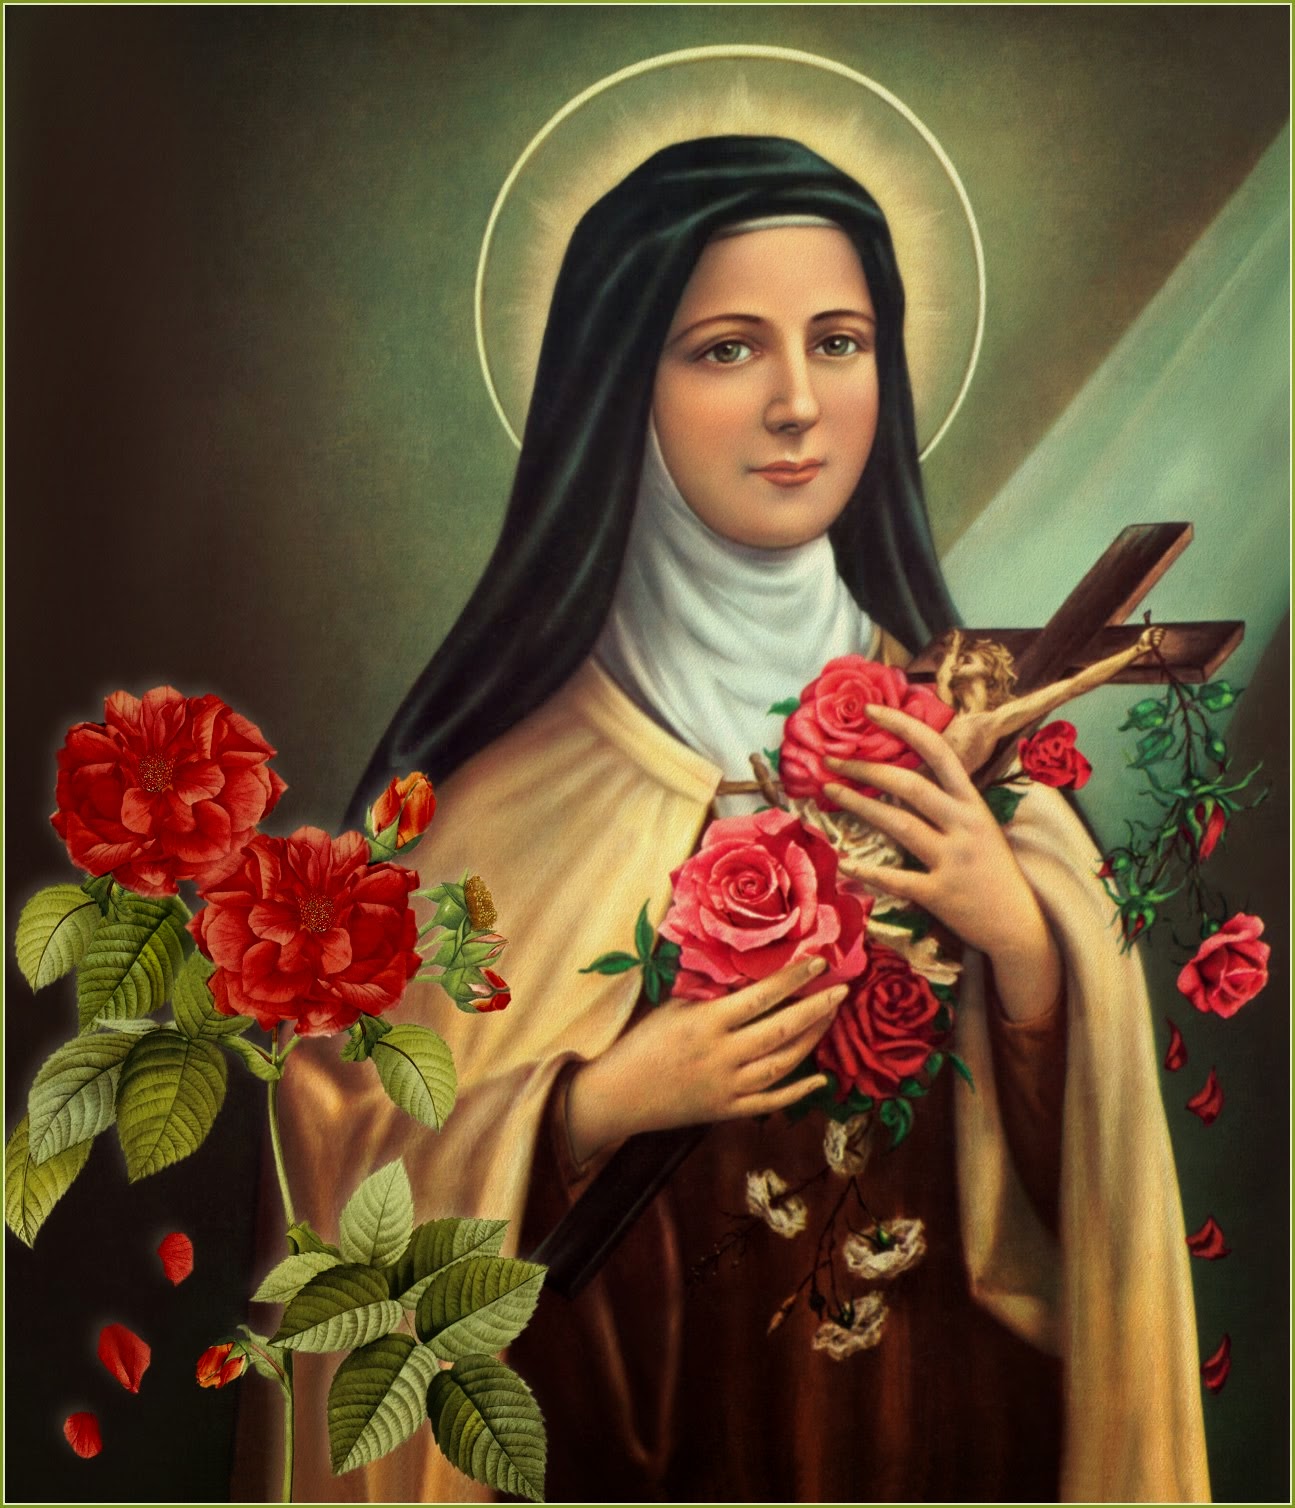 St. Therese Image 1